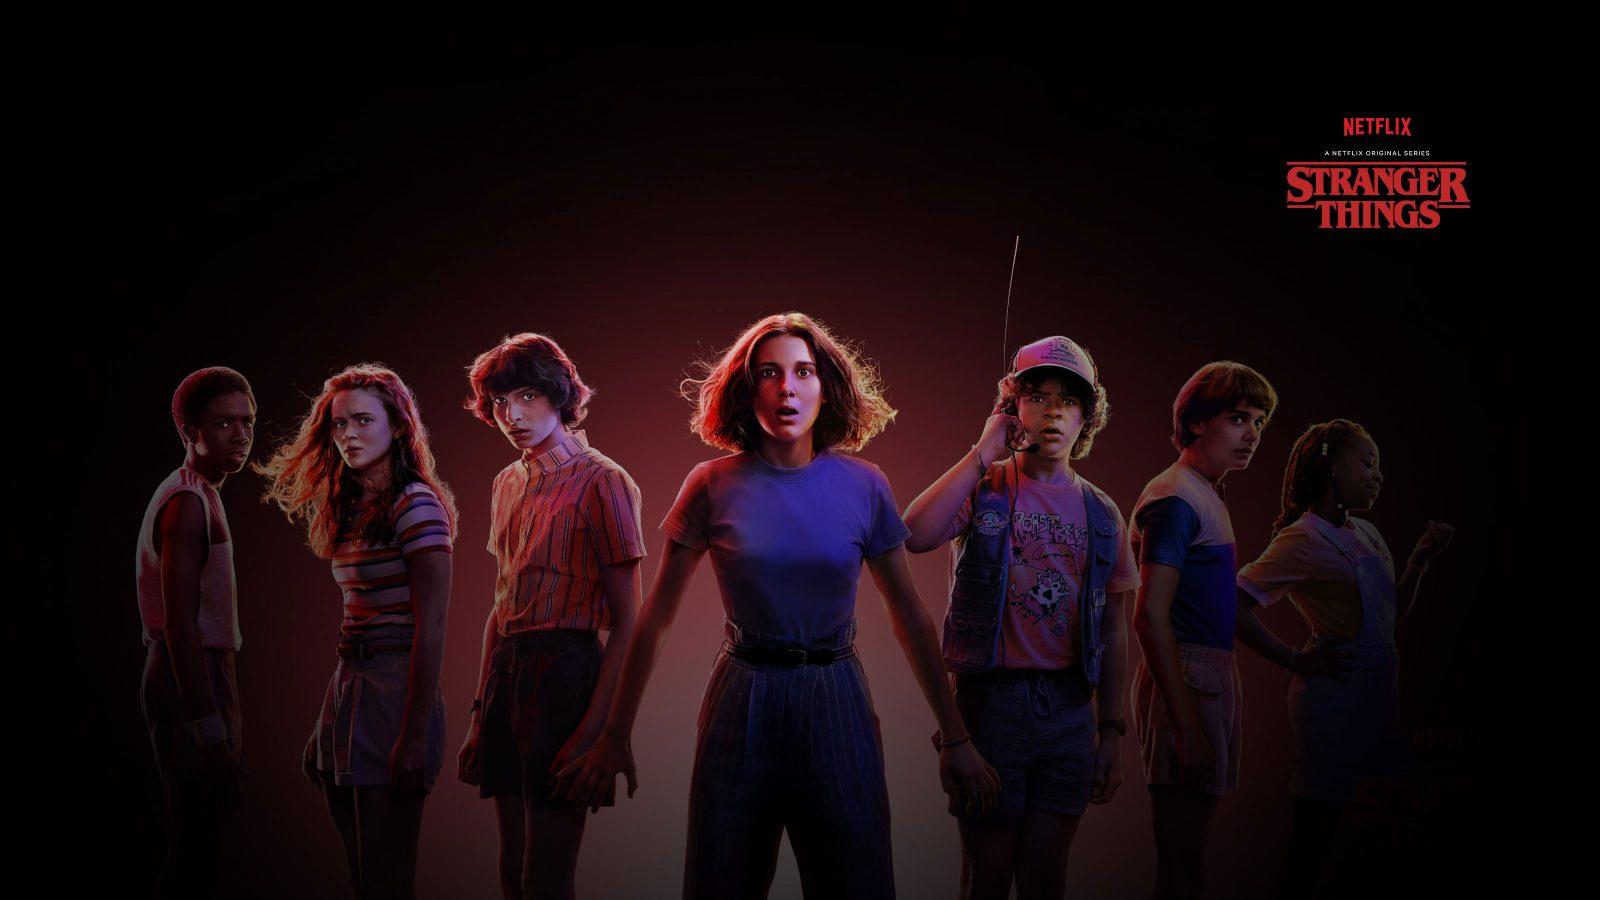 Microsoft goes retro for Stranger Things. Microsoft In Culture